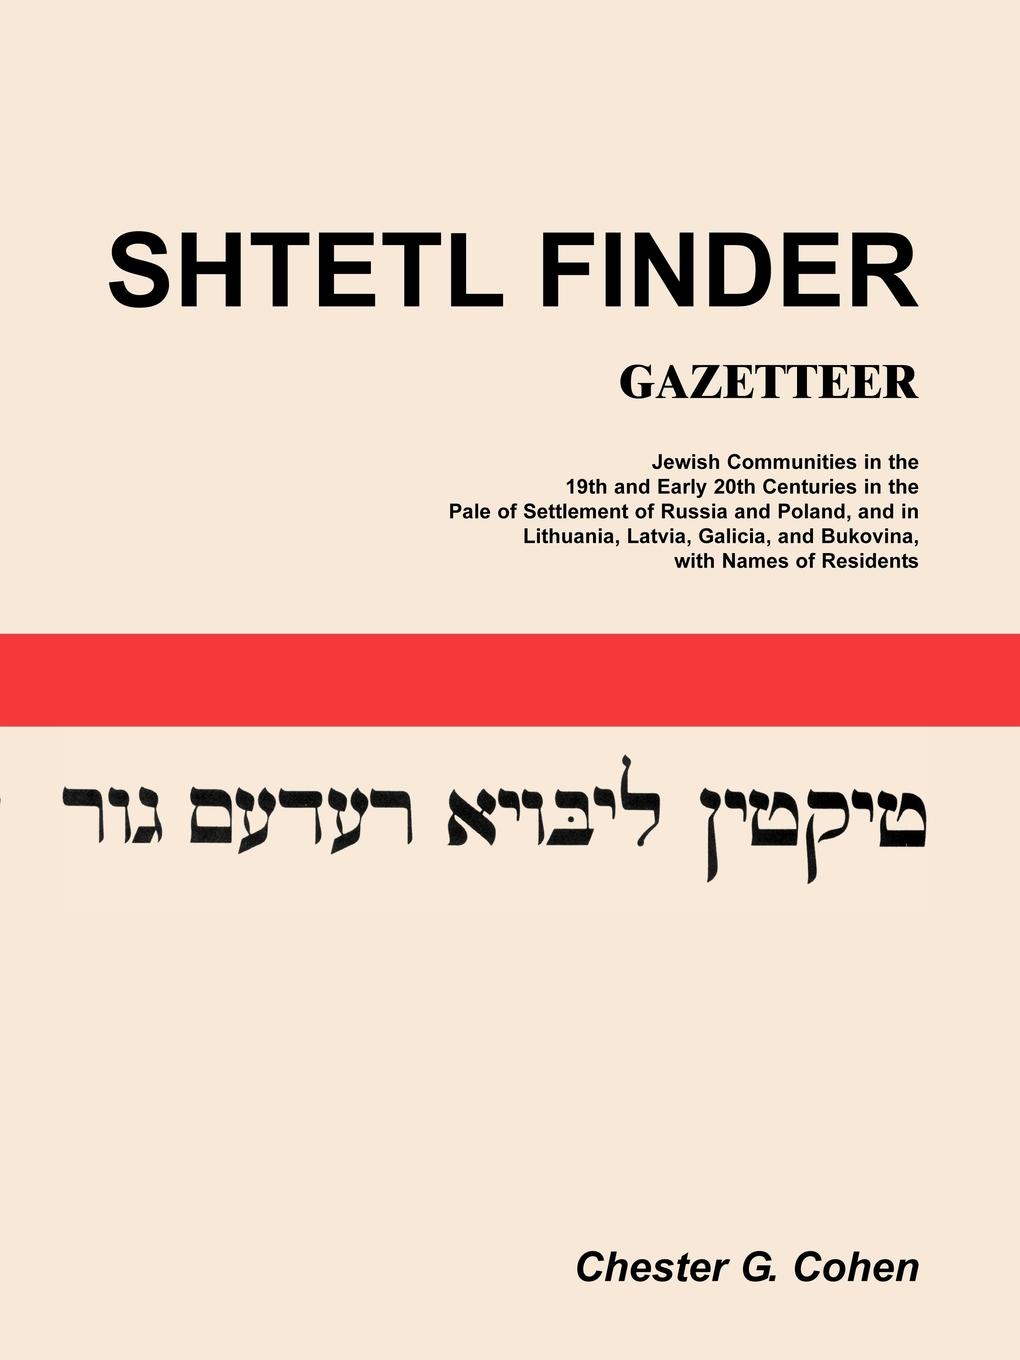 Shtetl Finder Gazetteer. Jewish Communities in the 19th and Early 20th Centuries in the Pale of Settlement of Russia and Poland, and in Lithuan